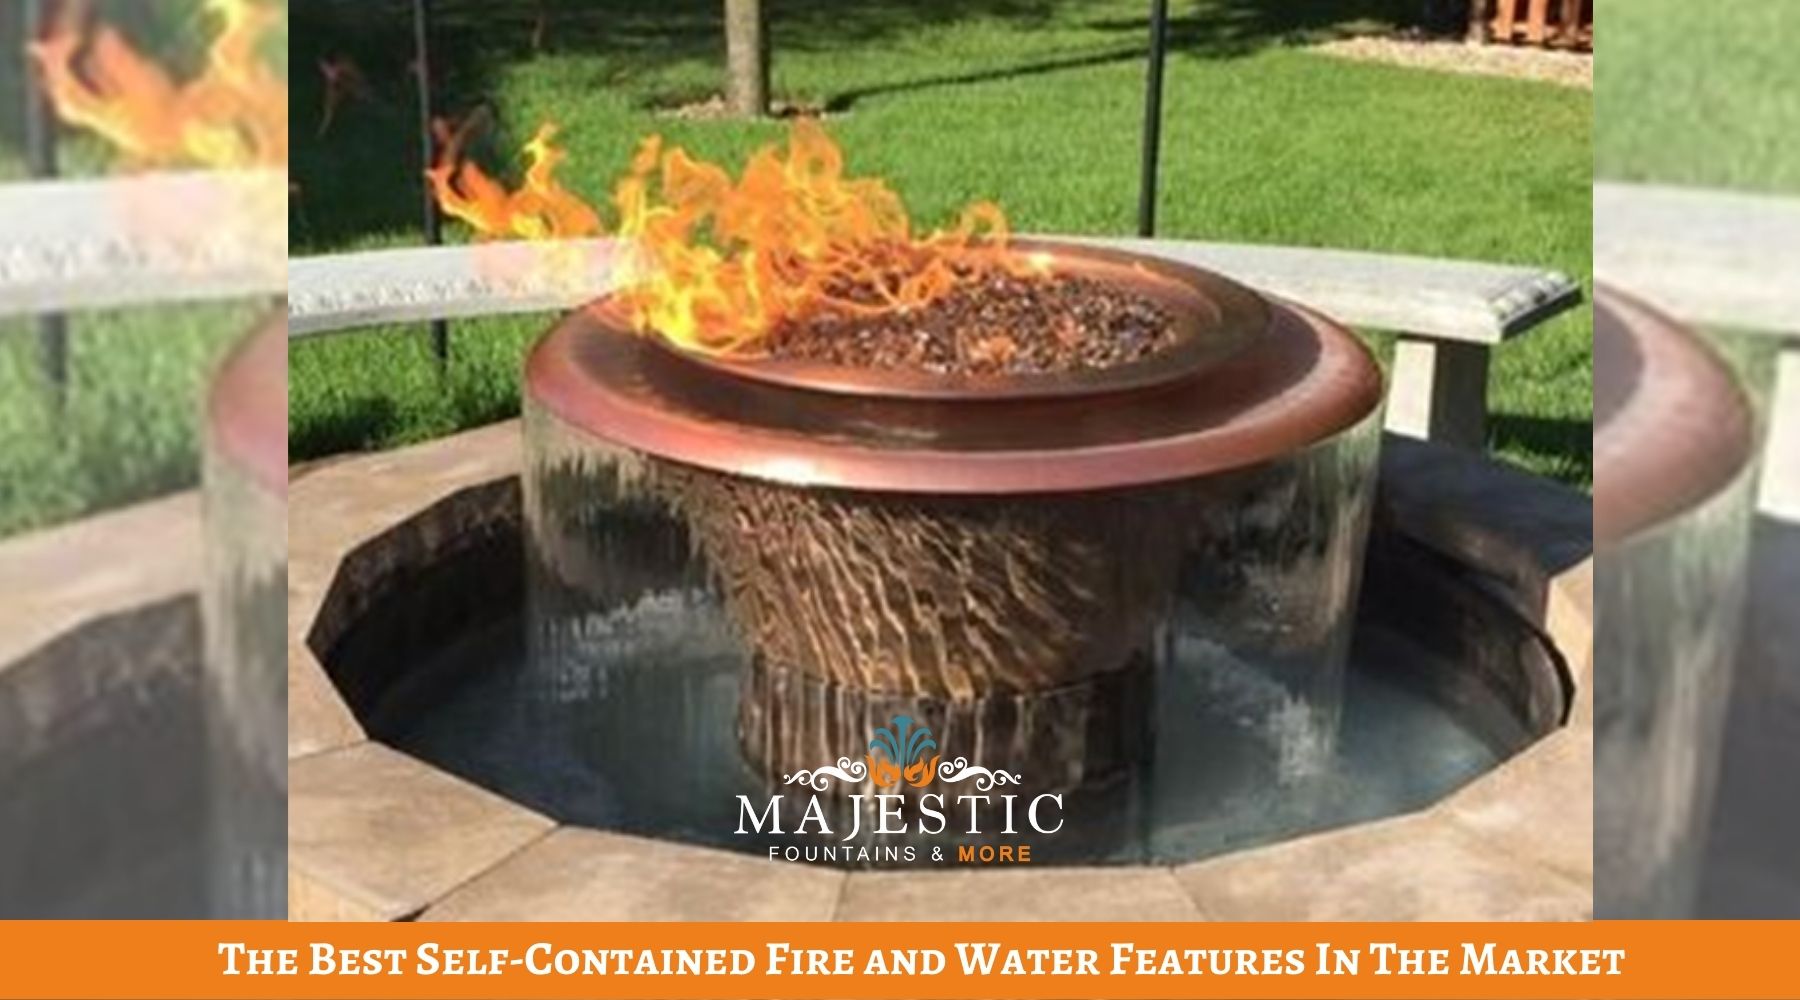 The Best Self-Contained Fire and Water Features In The Market